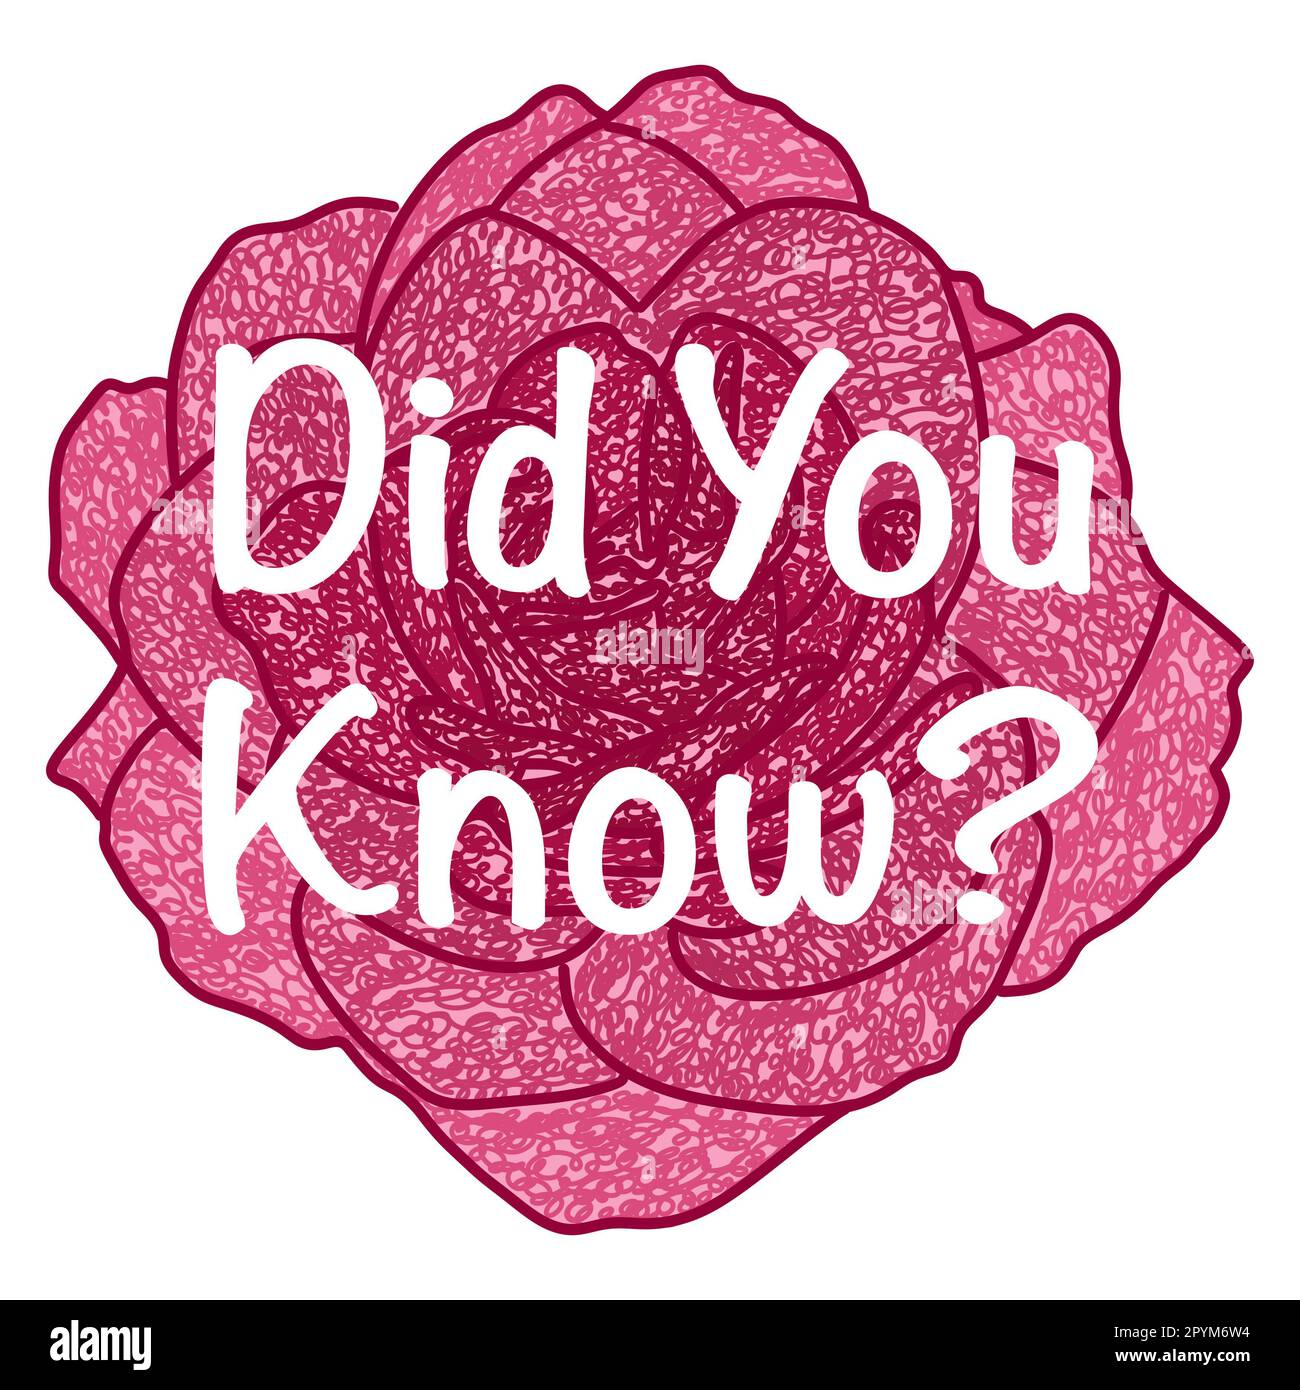 Did You Know Flower Pink Sketch White Text Isolated Stock Photo